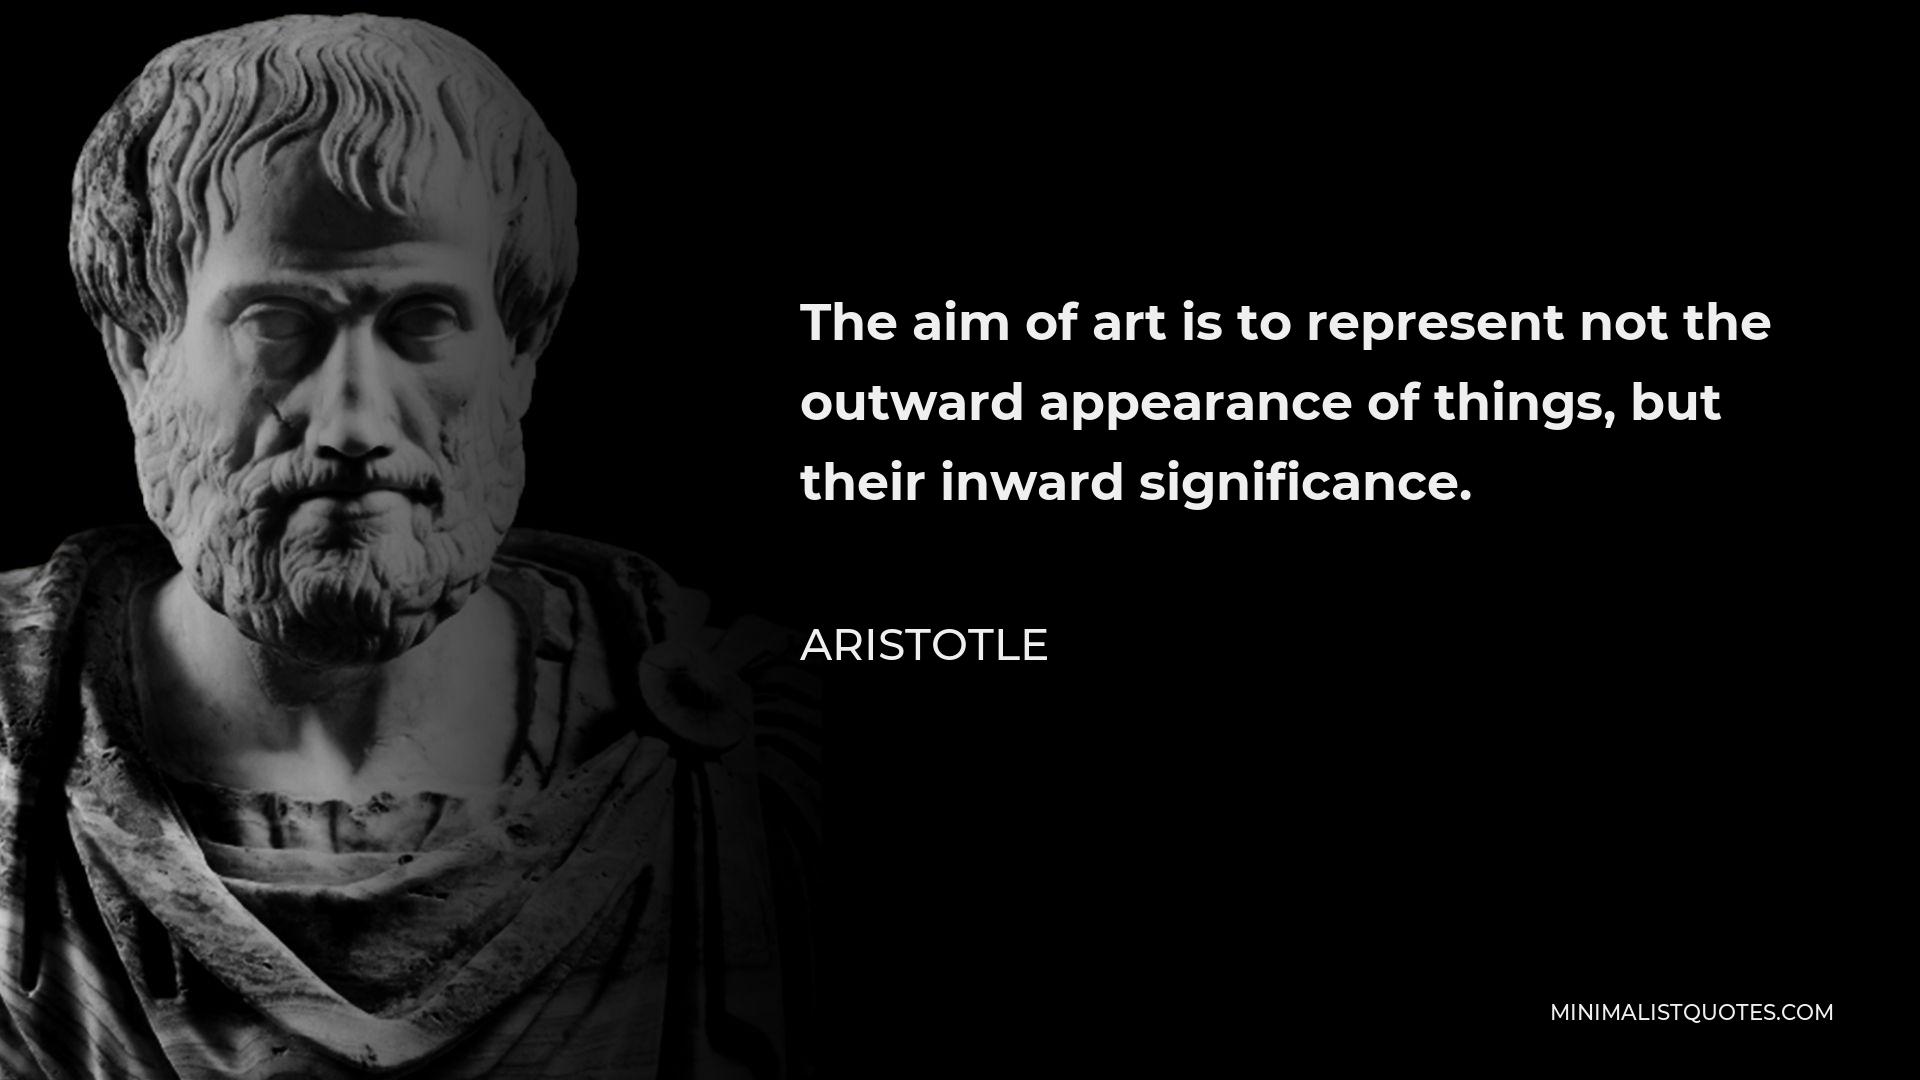 Aristotle Quote - The aim of art is to represent not the outward appearance of things, but their inward significance.